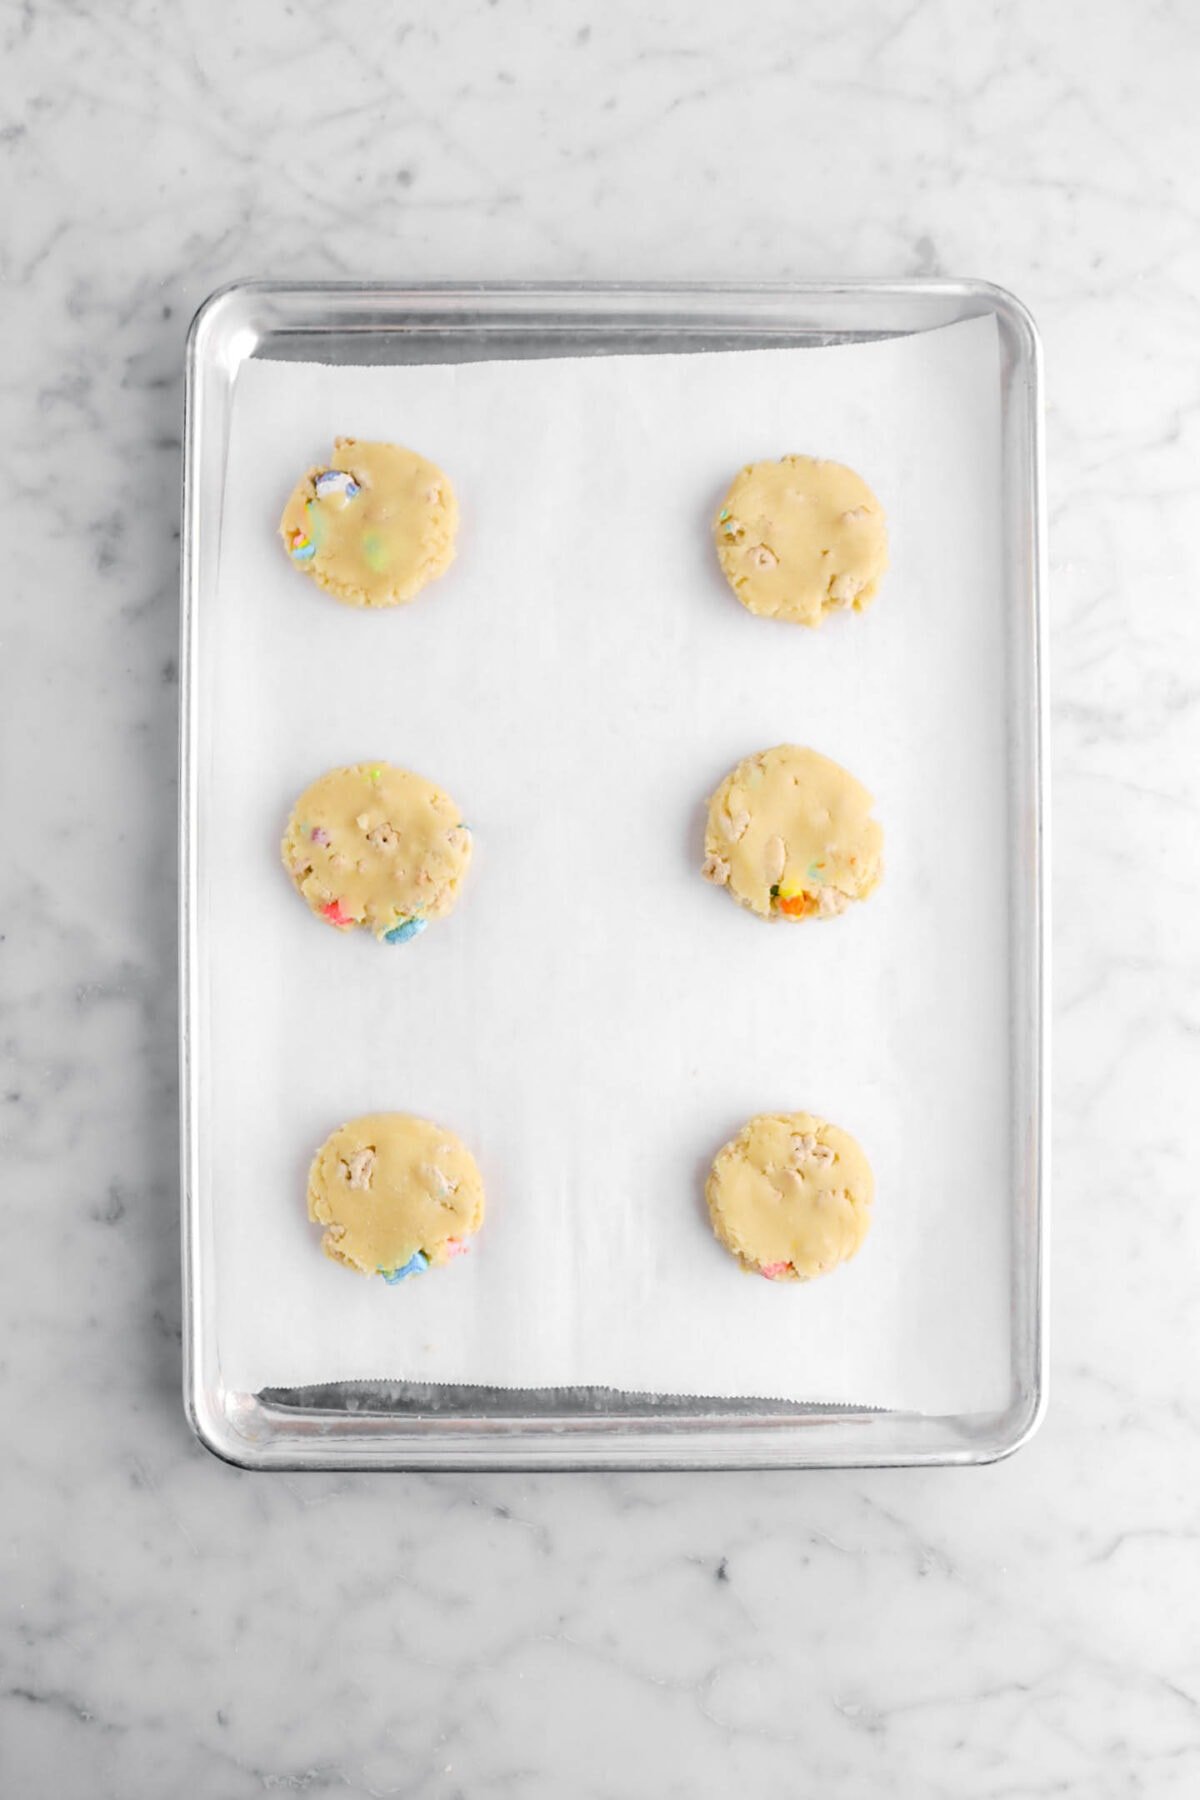 six cookie dough balls flatted on lined sheet pan.